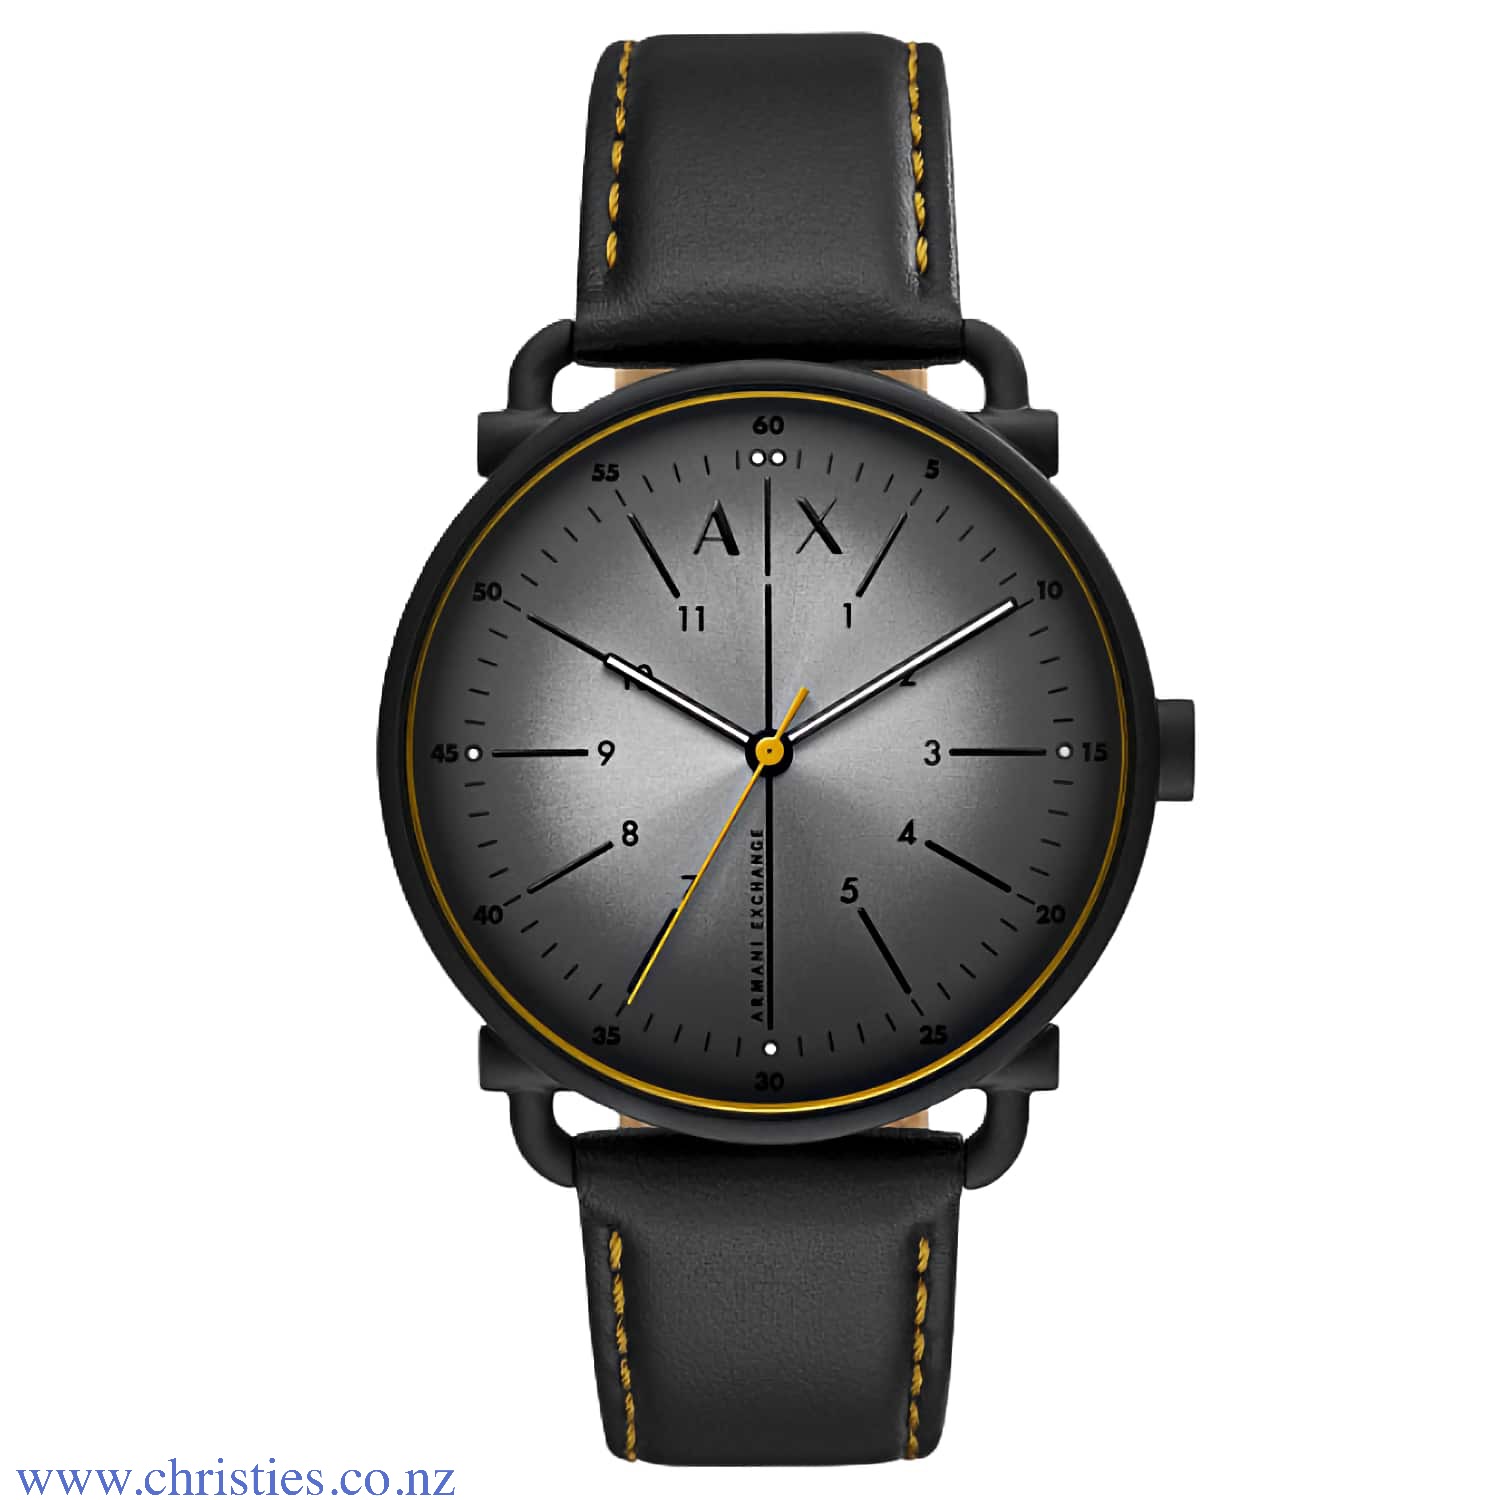 AX2904 A|X Armani Exchange Rocco Watch. AX2904 A|X Armani Exchange Rocco Watch LAYBUY - Pay it easy, in 6 weekly payments and have it now. Only pay the price of your purchase, when you pay your instalments on time. A late fee may be applied for missed pay